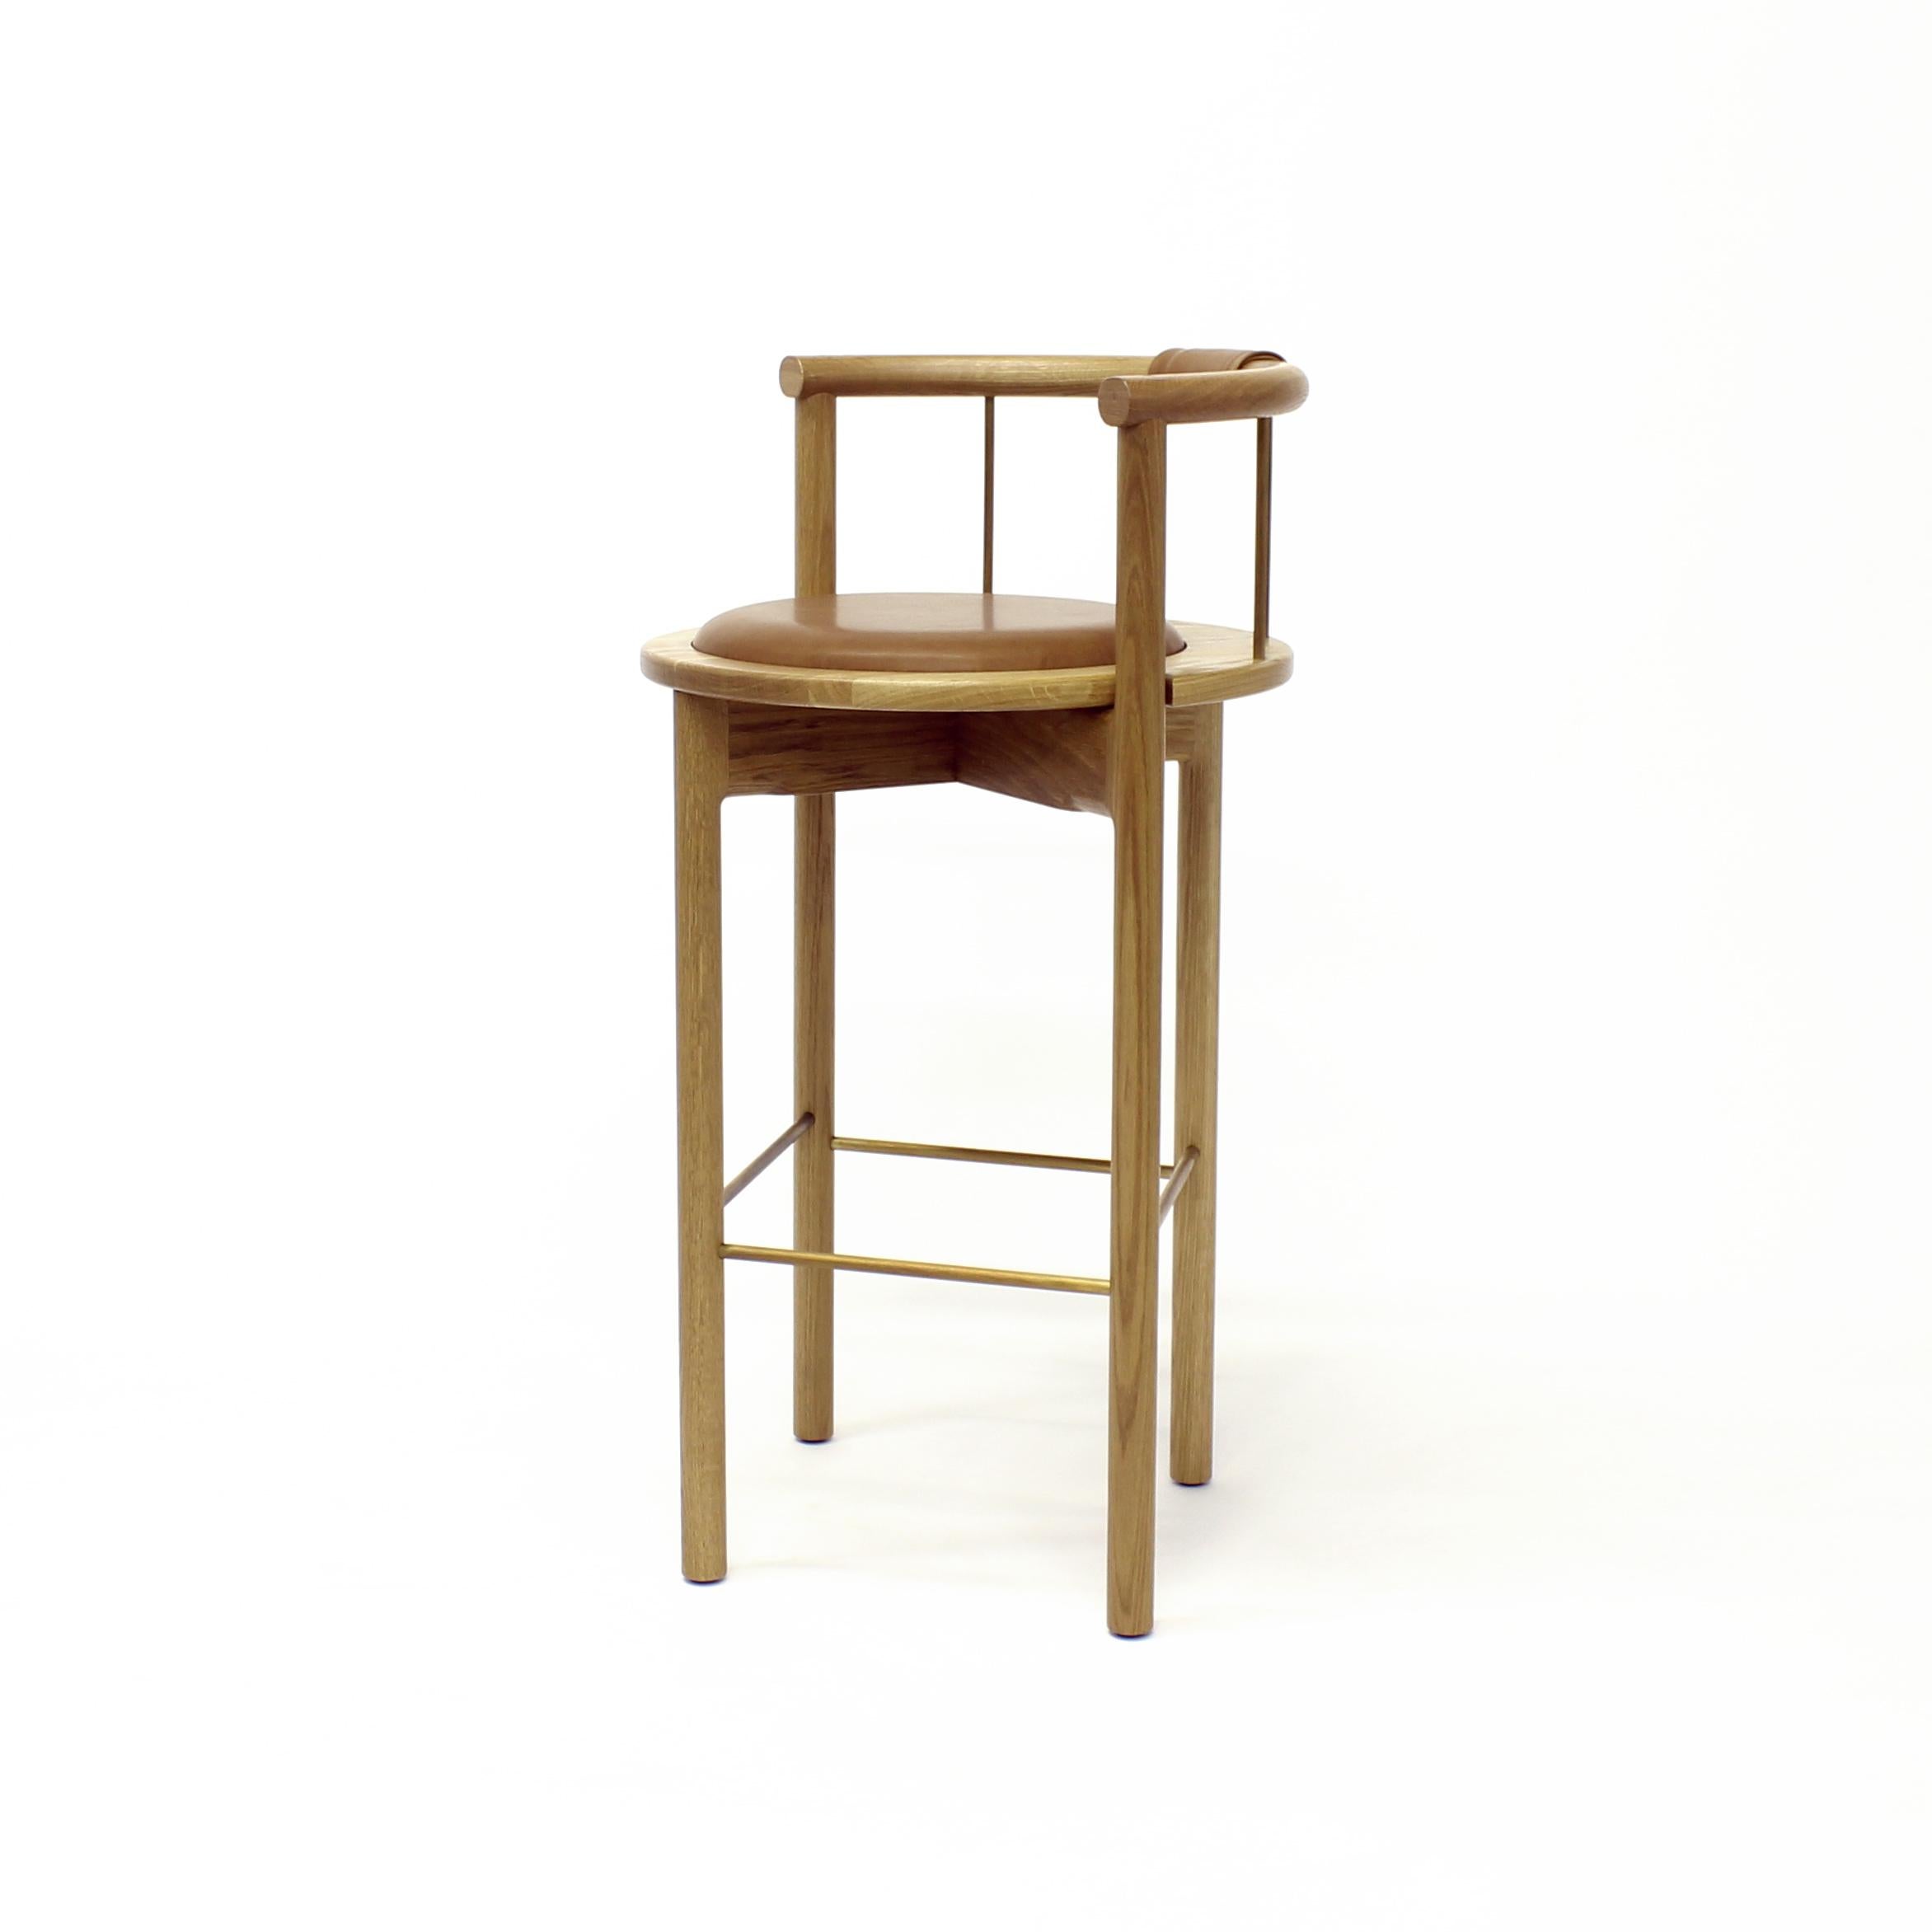 Lloyd bar stool 

Solid wood frame / hand rubbed oil finish / brushed brass, bronze or black rungs / leather wrapped back support / recessed leather seat cushion

Measures: 23” W x 21” D x 39” H (30” seat height)

Also available in counter